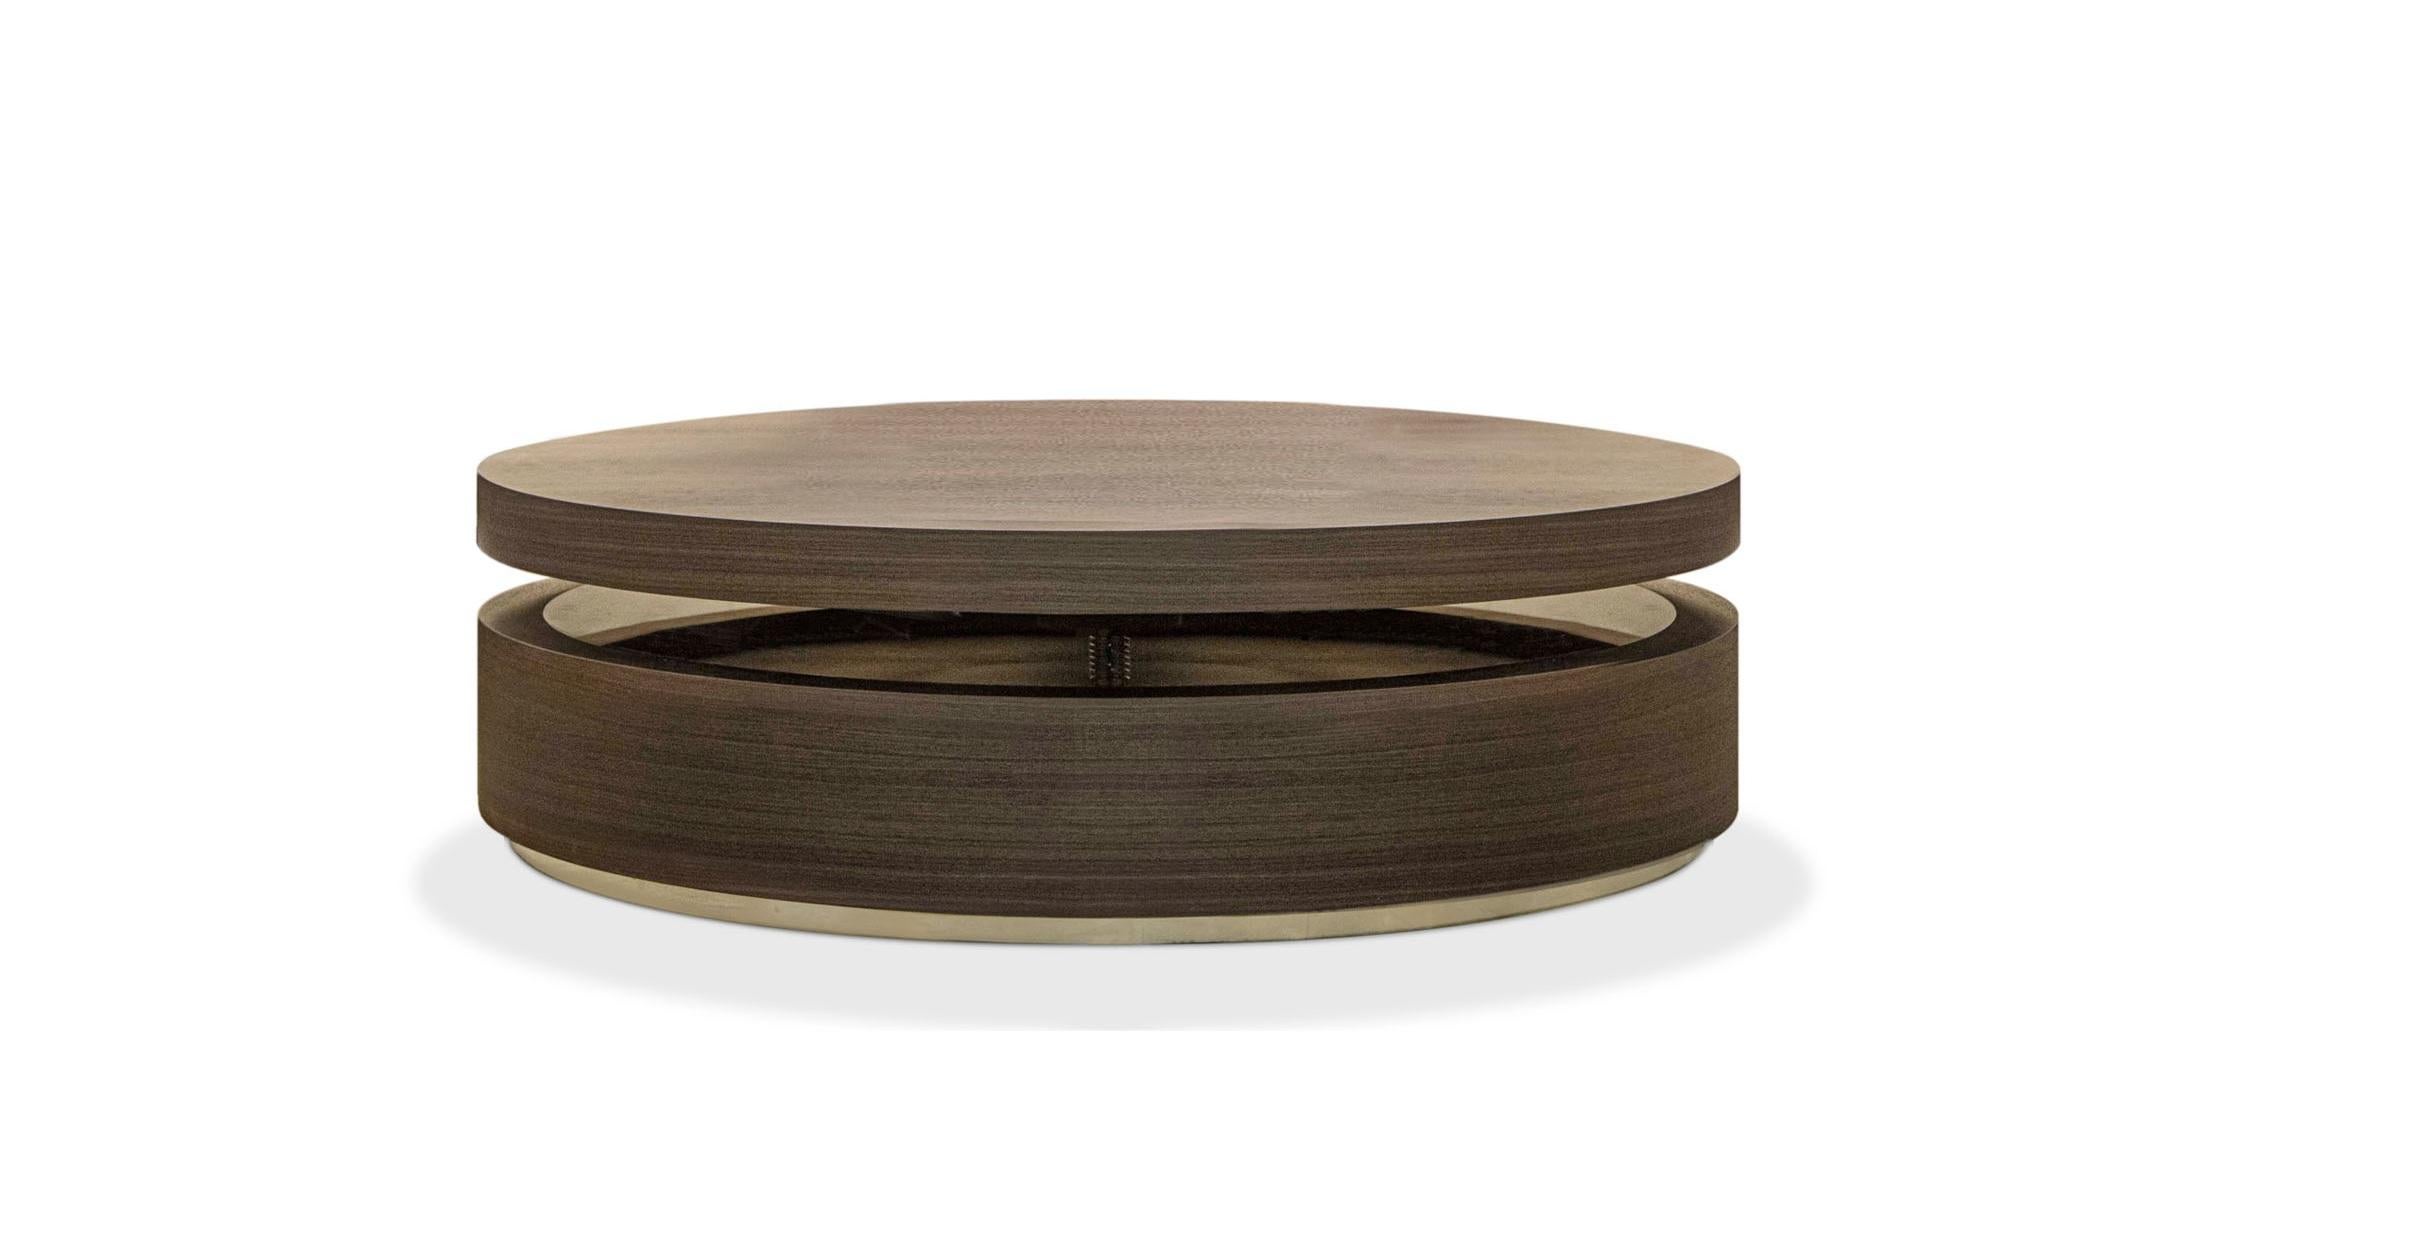 Walnut and brass ego coffee table by LK Edition
Dimensions: 110 x 26 x H 38 cm 
Materials: Matt finish walnut with polished brass
Also available in Walnut.

It is with the sense of detail and requirement, this research of the exception by the